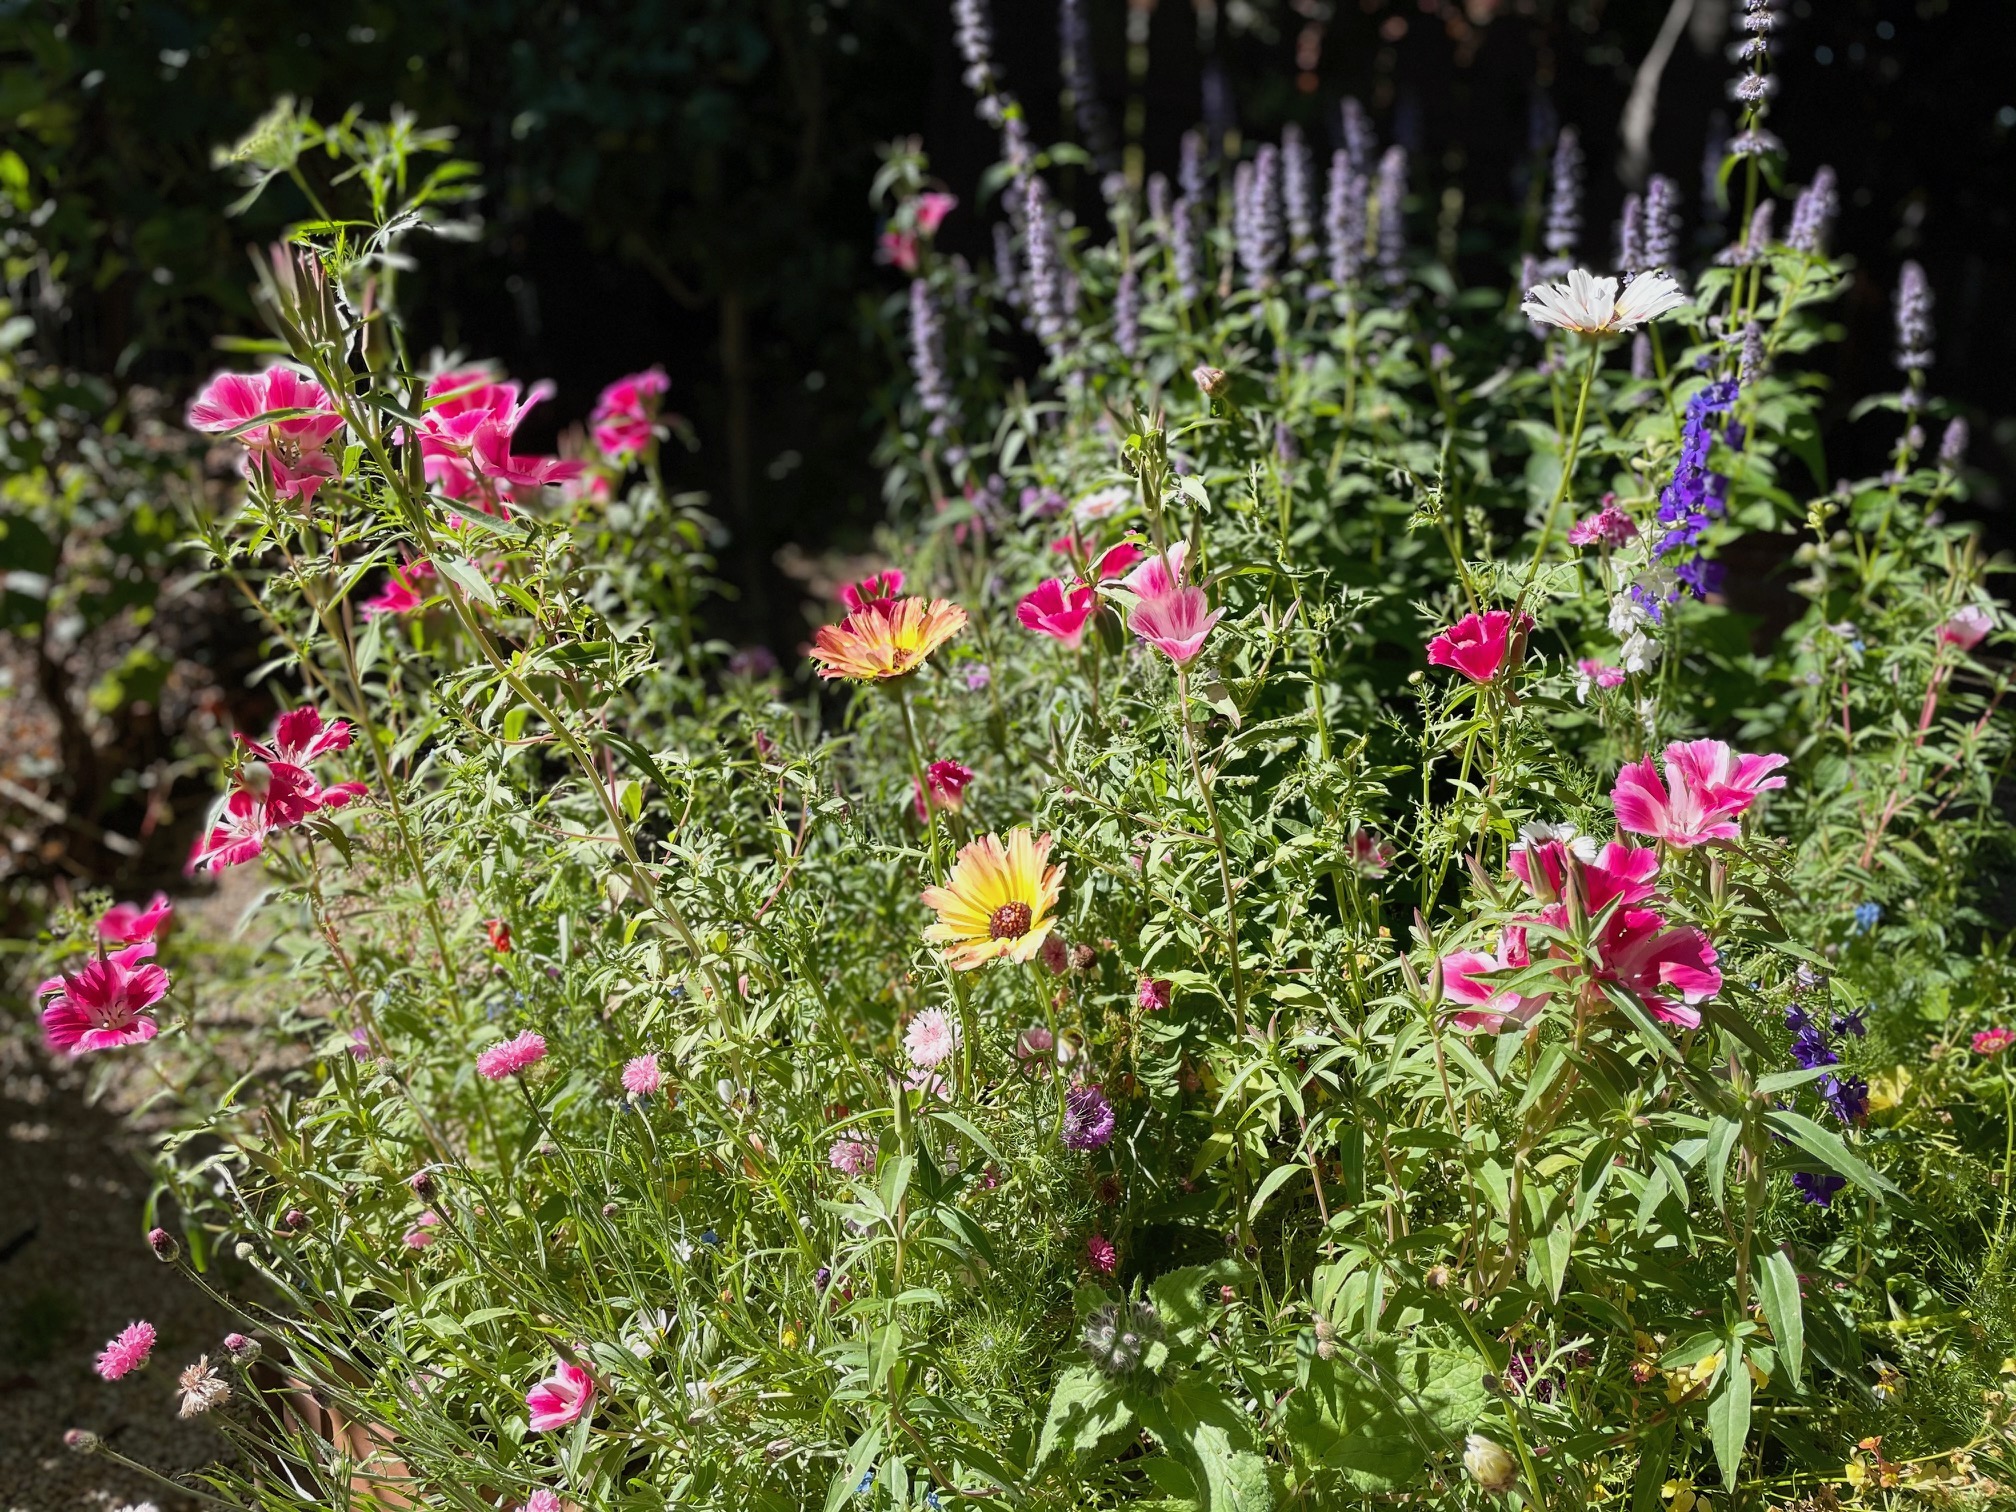 How to Grow this Annual Wildflower